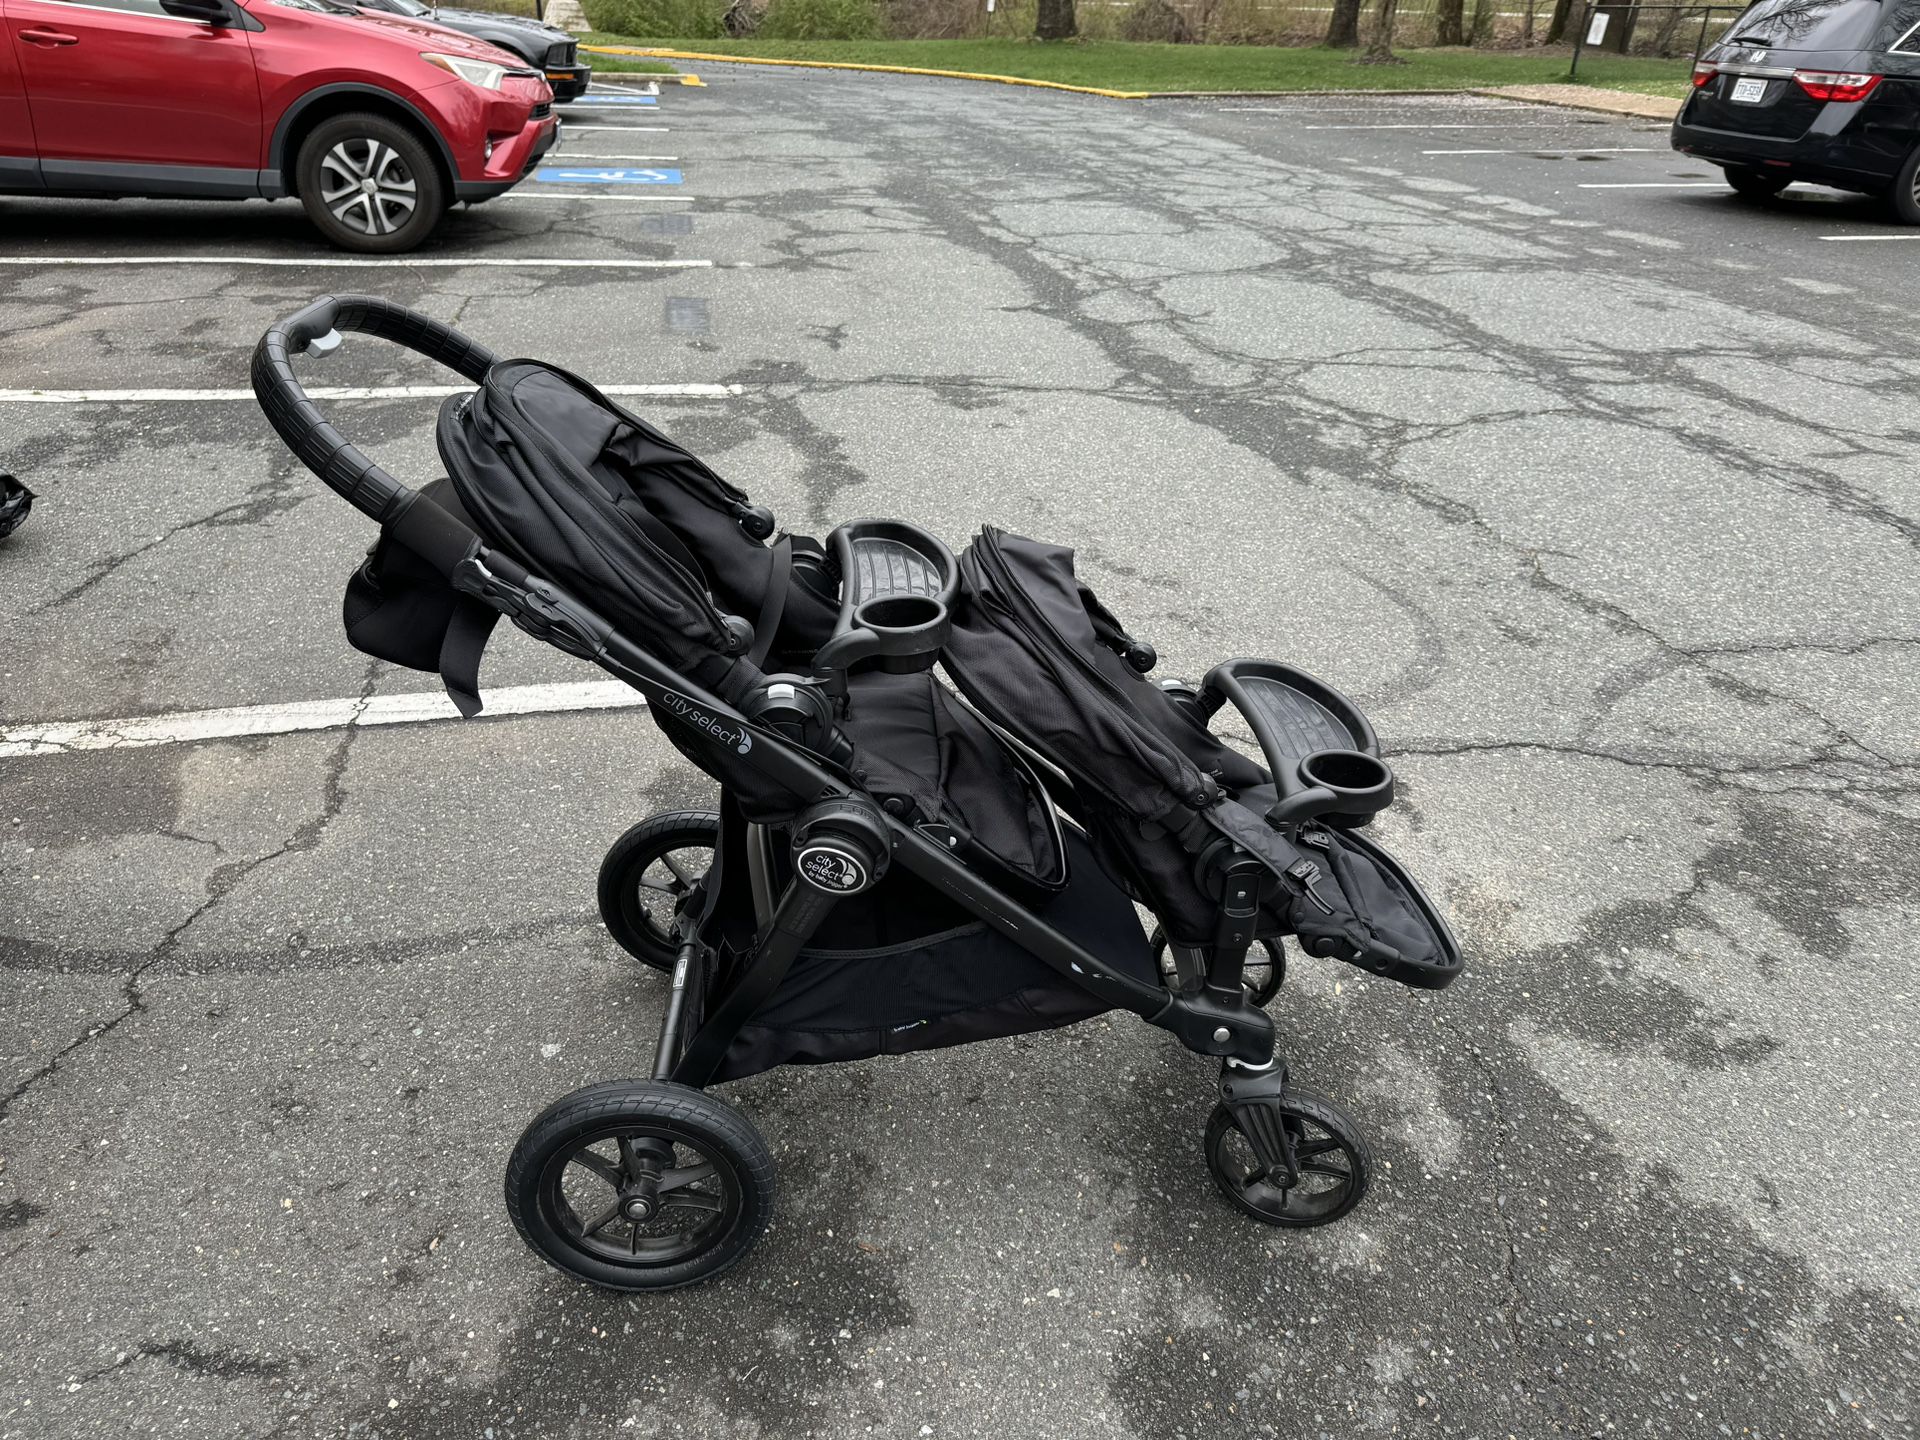 City Select Double Stroller 